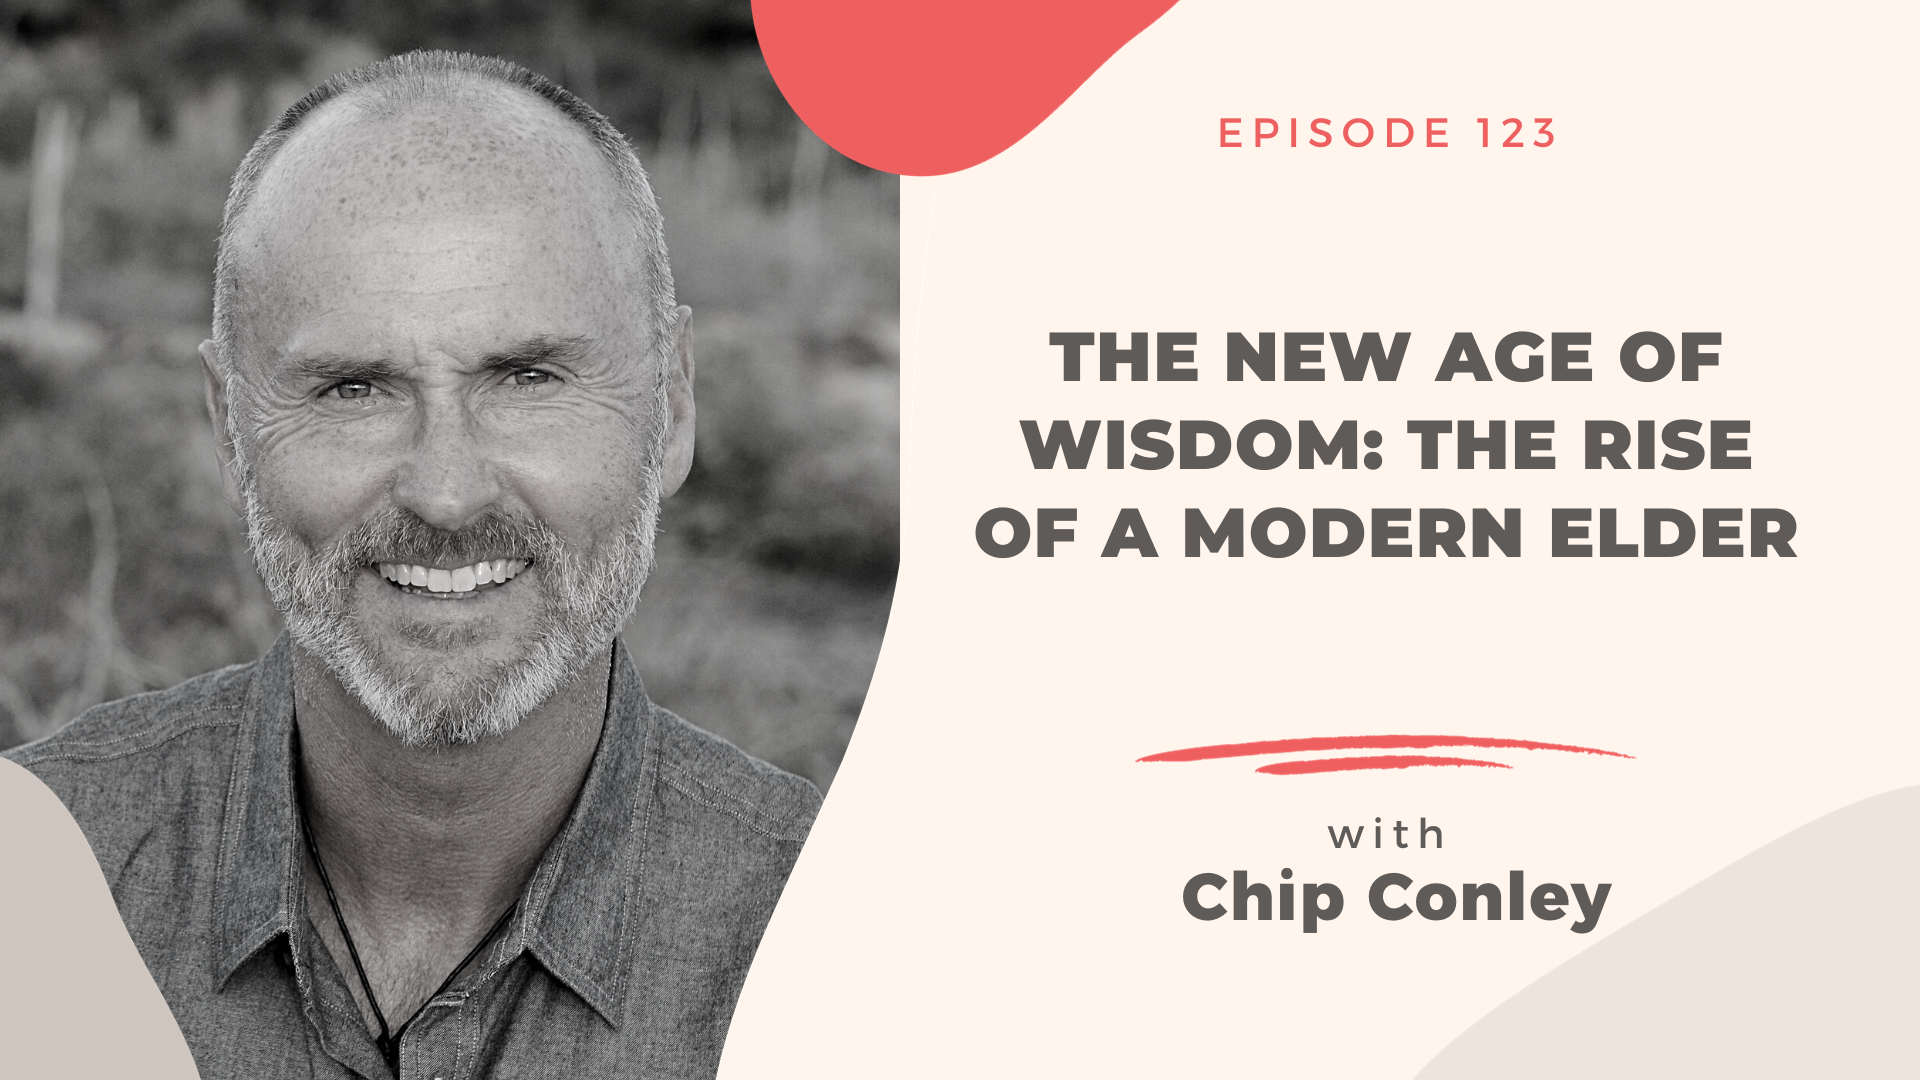 Chip Conley at the CultureLab podcast